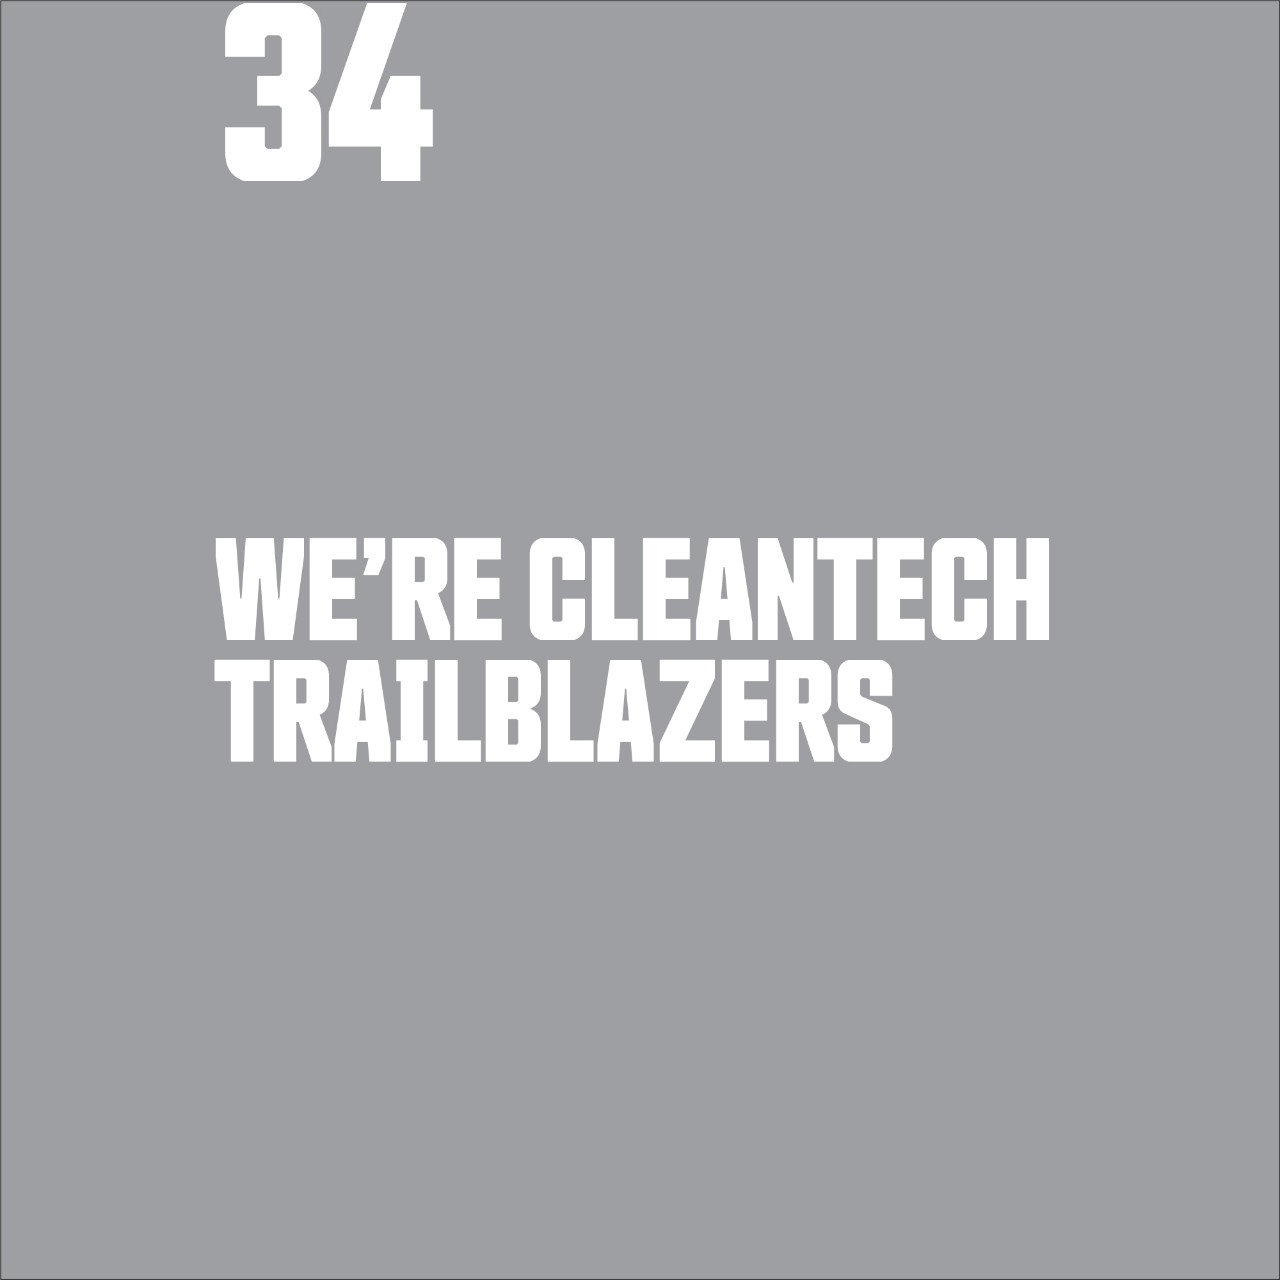 We Are Cleantech Trailblazers